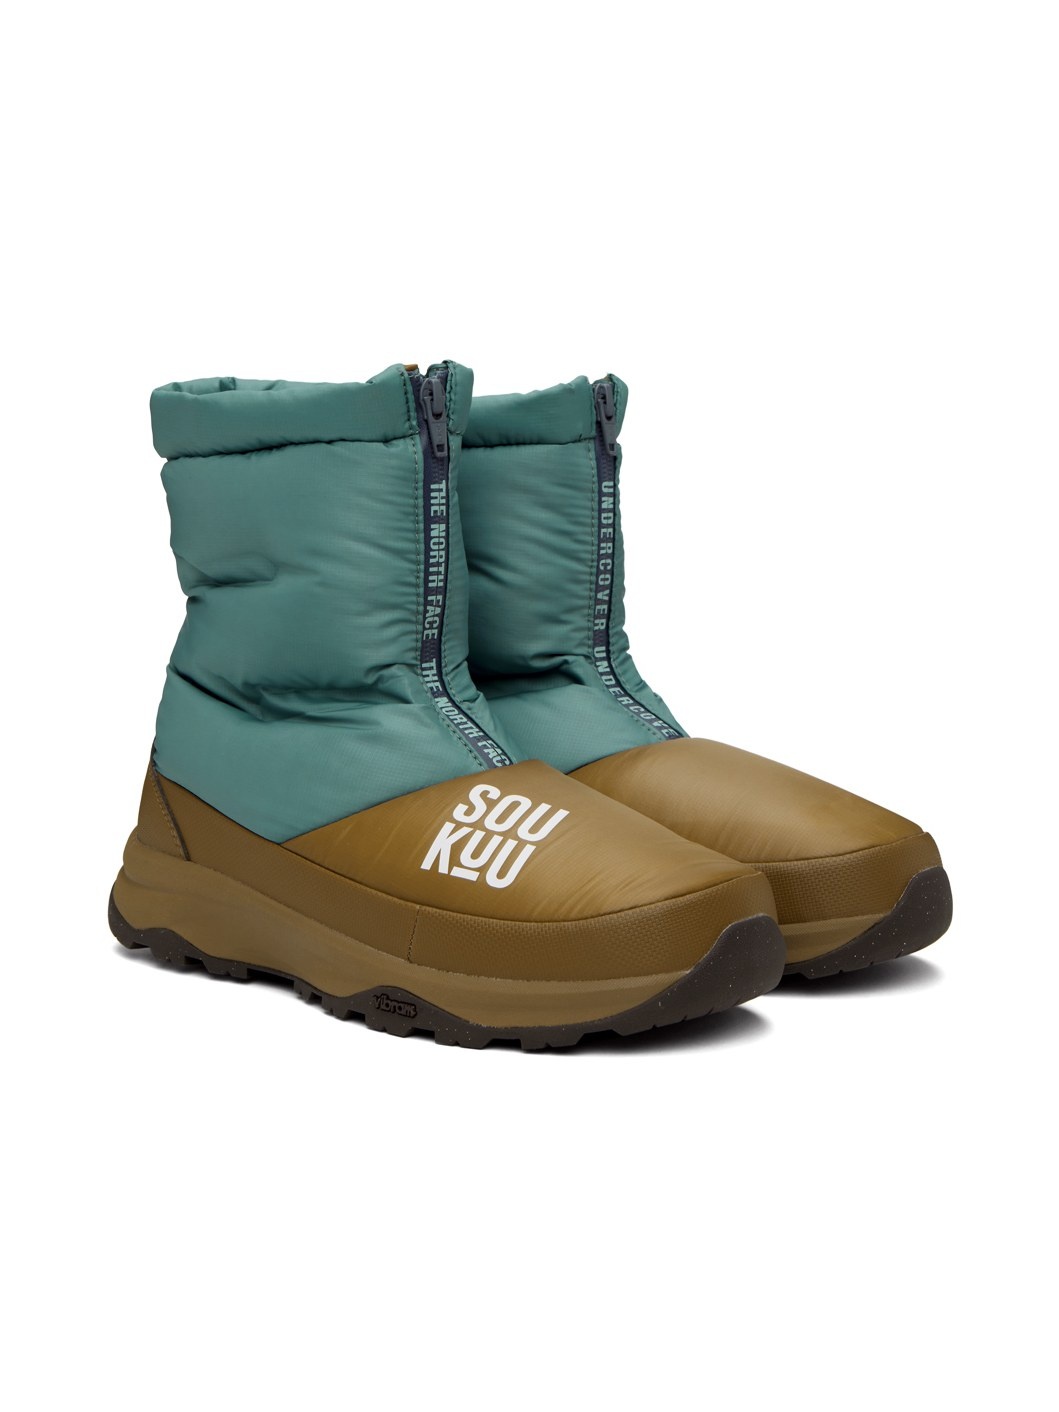 Green & Beige The North Face Edition Soukuu Nuptse Boots - 4